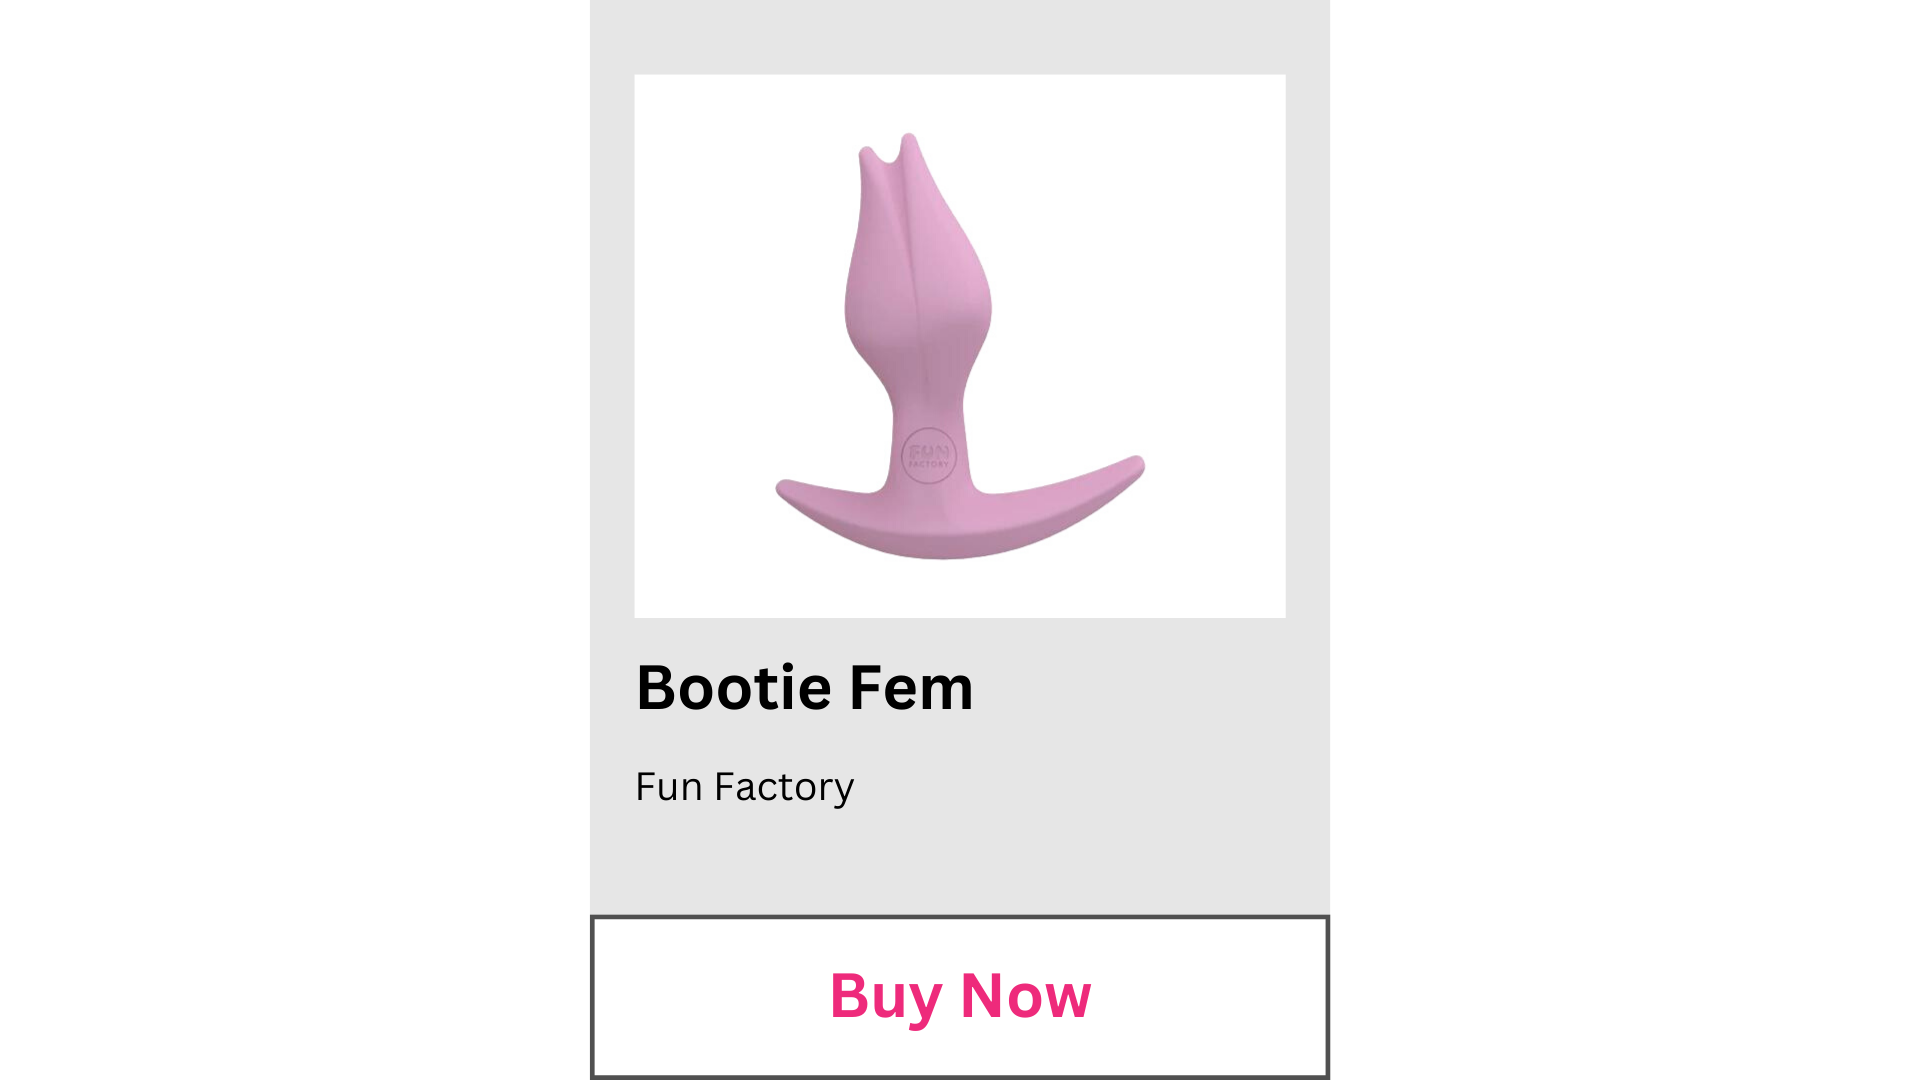 Buy the Bootie Fem Anal Plug from Fun Factory.